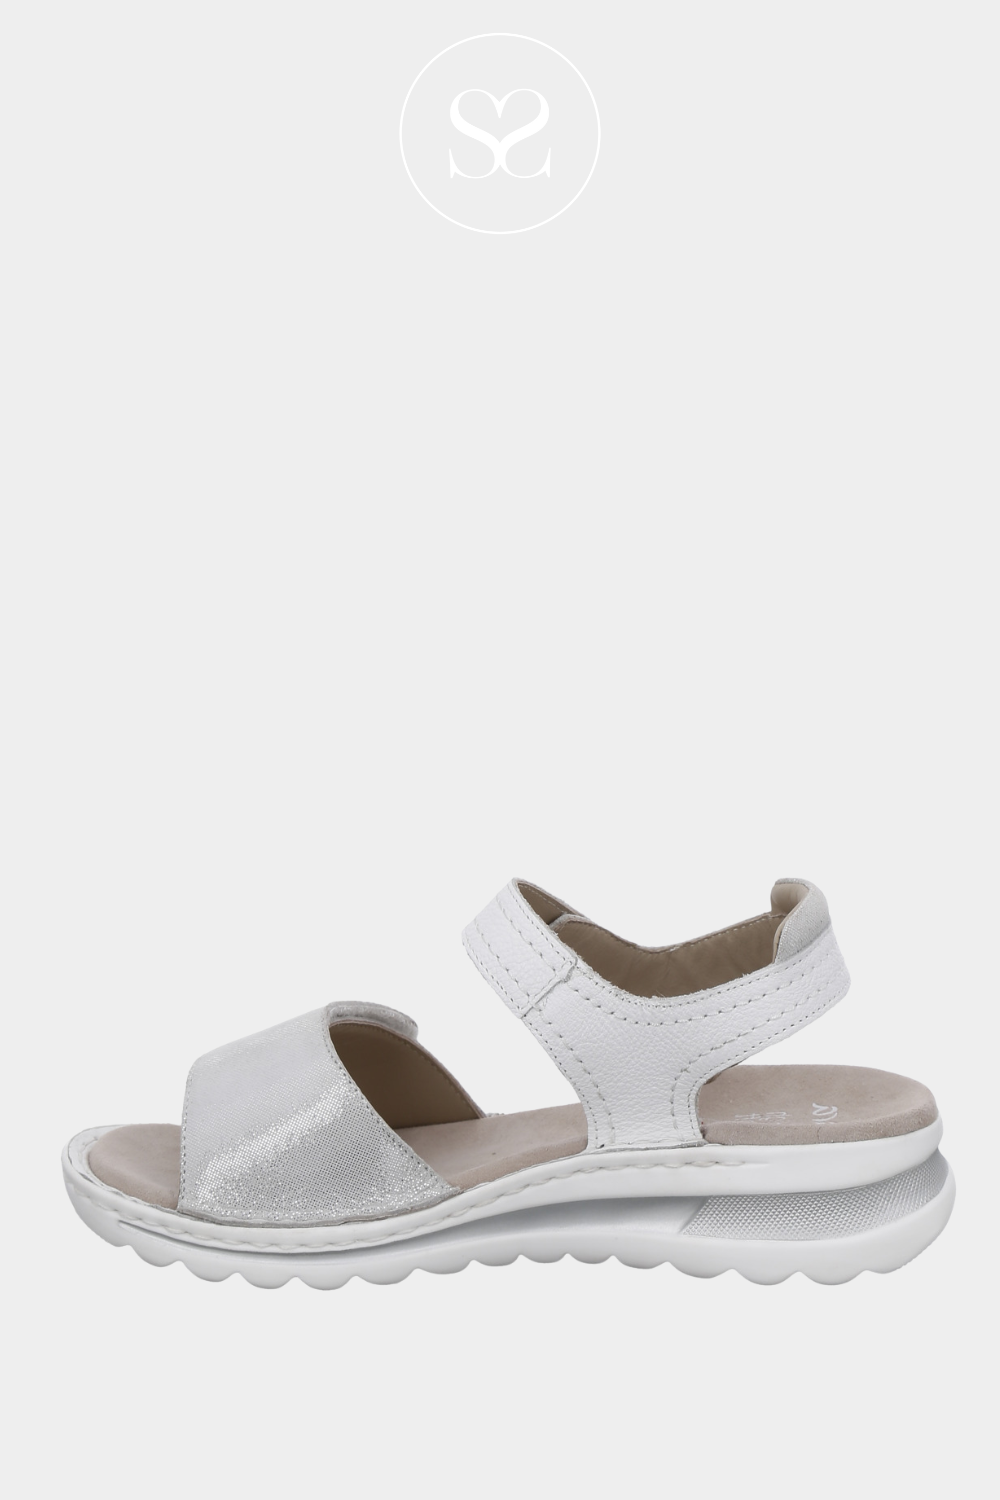 ARA 12-47207 WHITE LEATHER WEDGE WALKING SANDALS WITH TWO VELCRO STRAPSARA 12-47207 WHITE LEATHER WEDGE WALKING SANDALS WITH TWO VELCRO STRAPS